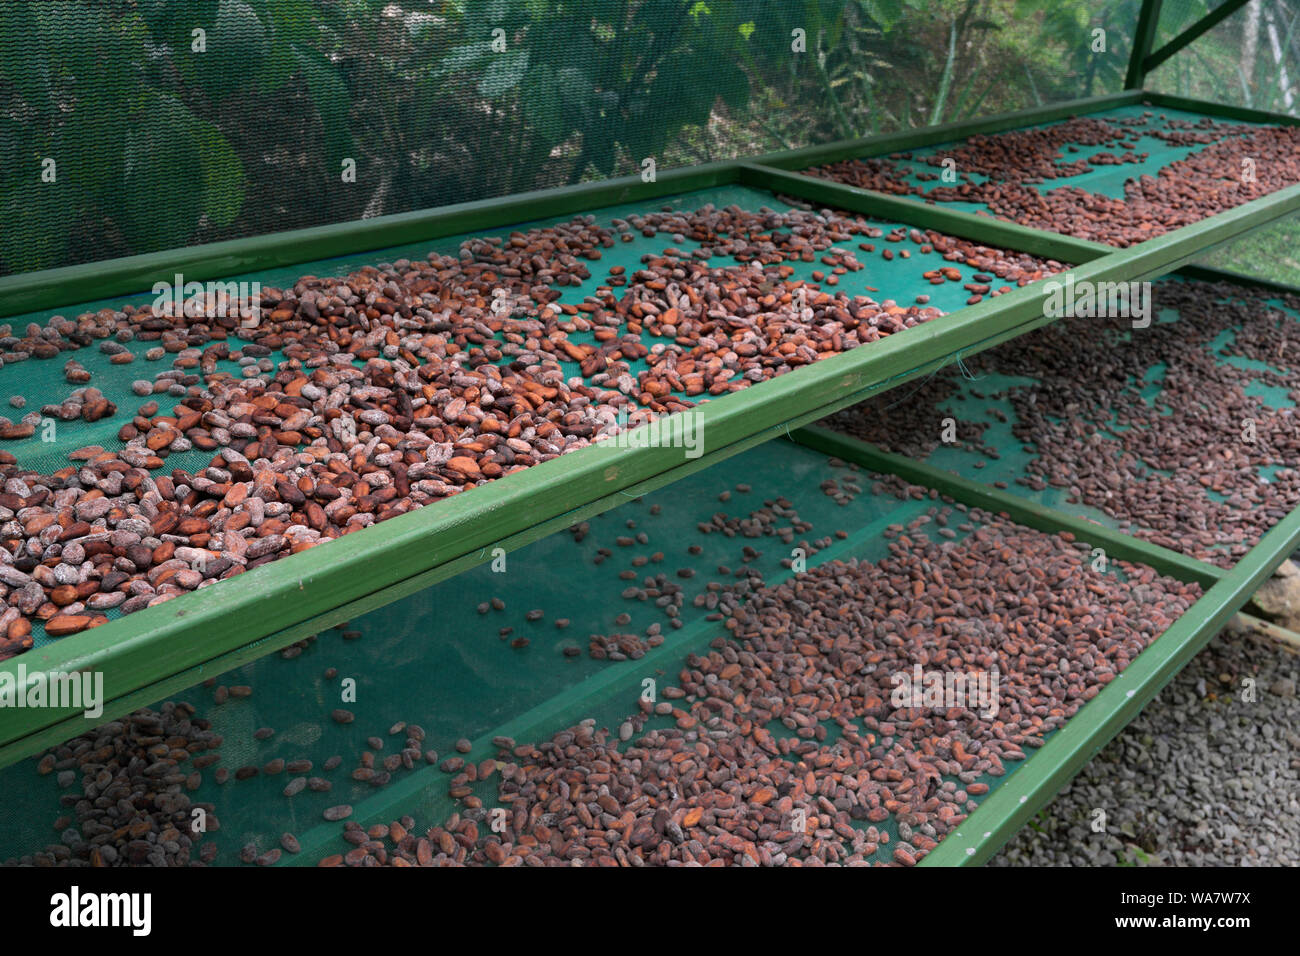 Cacao beans seeds drying, cacao farm, Costa Rica Stock Photo